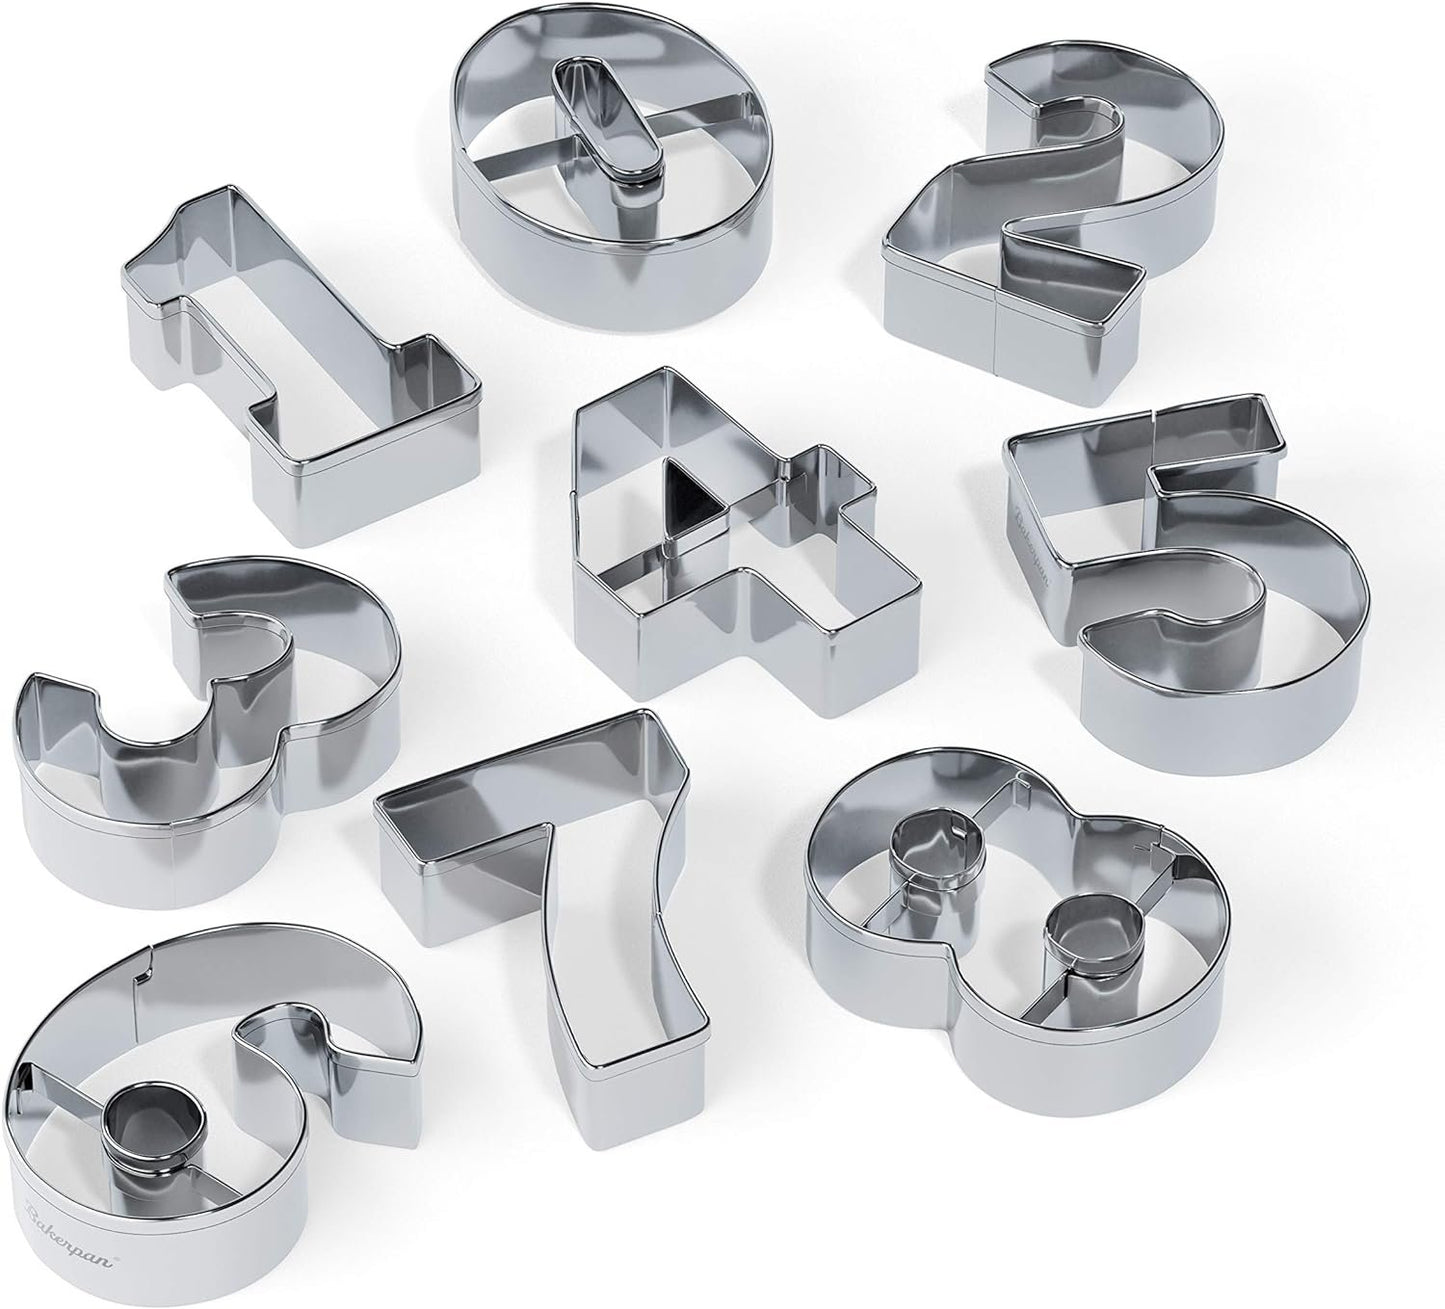 Bakerpan Stainless Steel Cookie Cutter Number Shapes Set 3 1/2" w/Dough Cutter